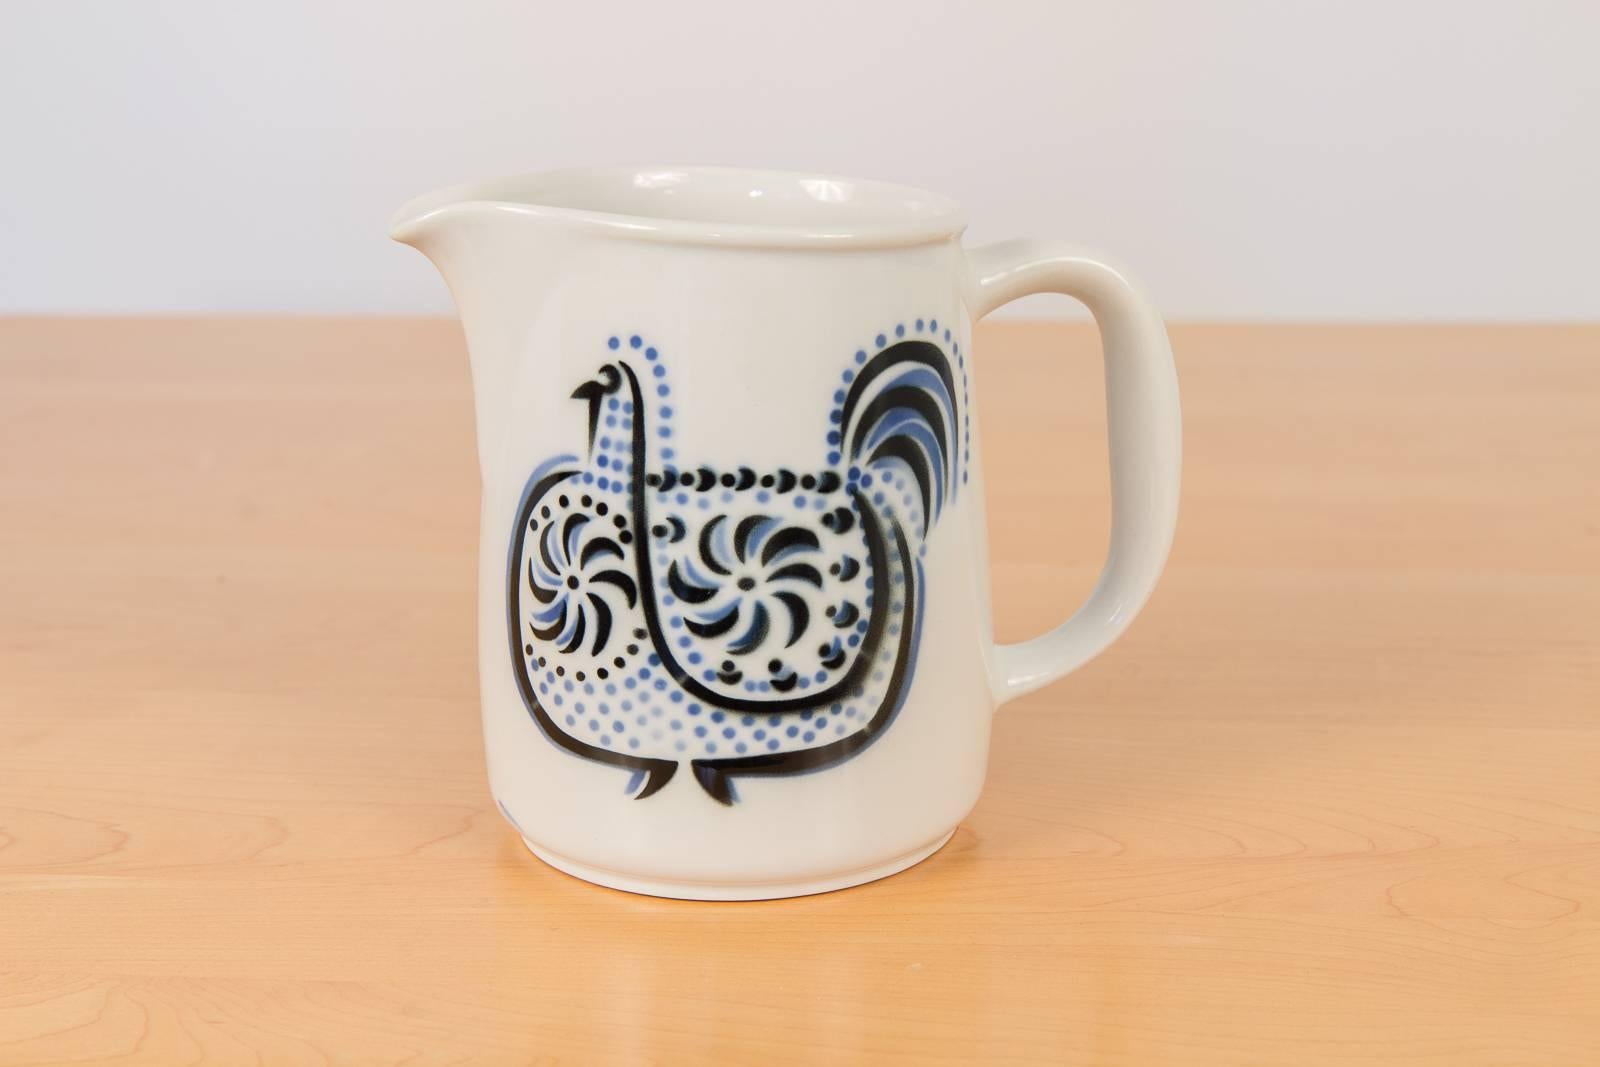 Mid-sized ceramic pitcher by Arabia with charming hen illustration and petite creamer with butterfly illustration, 1960s, marked on the underside and made in Finland. Pitcher is $250 and creamer is $150. Contact for group pricing.
Pitcher measures: